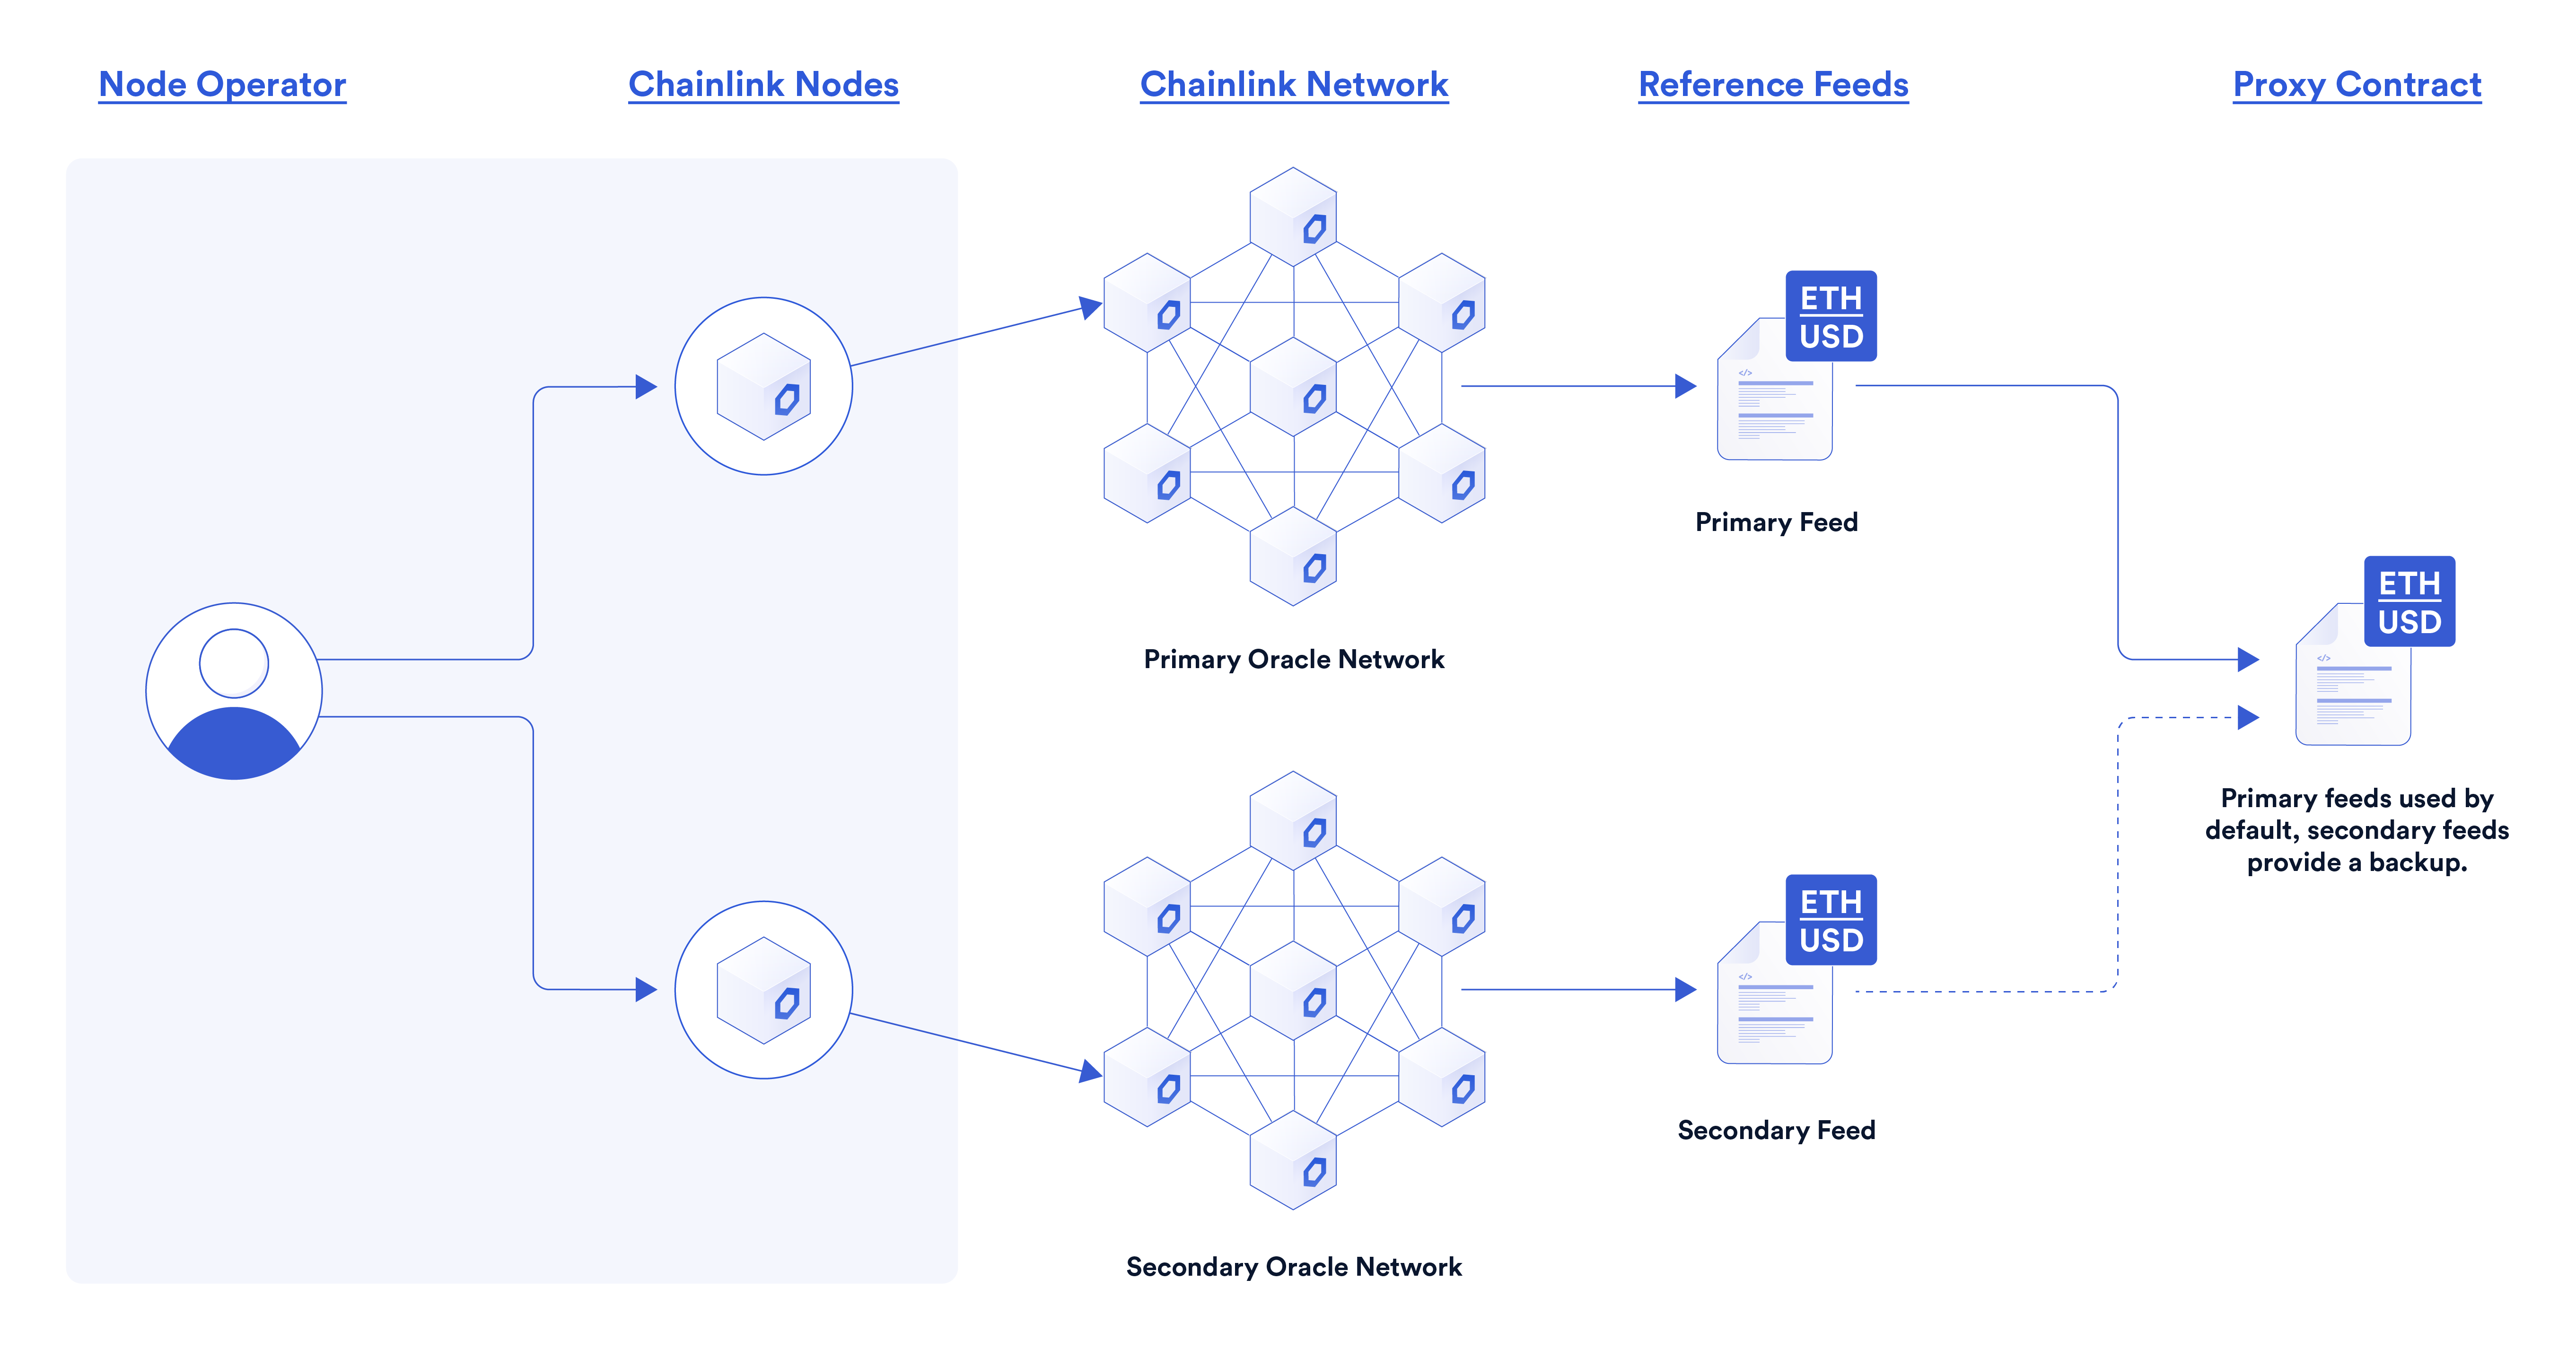 Chainlink Price Feed backups